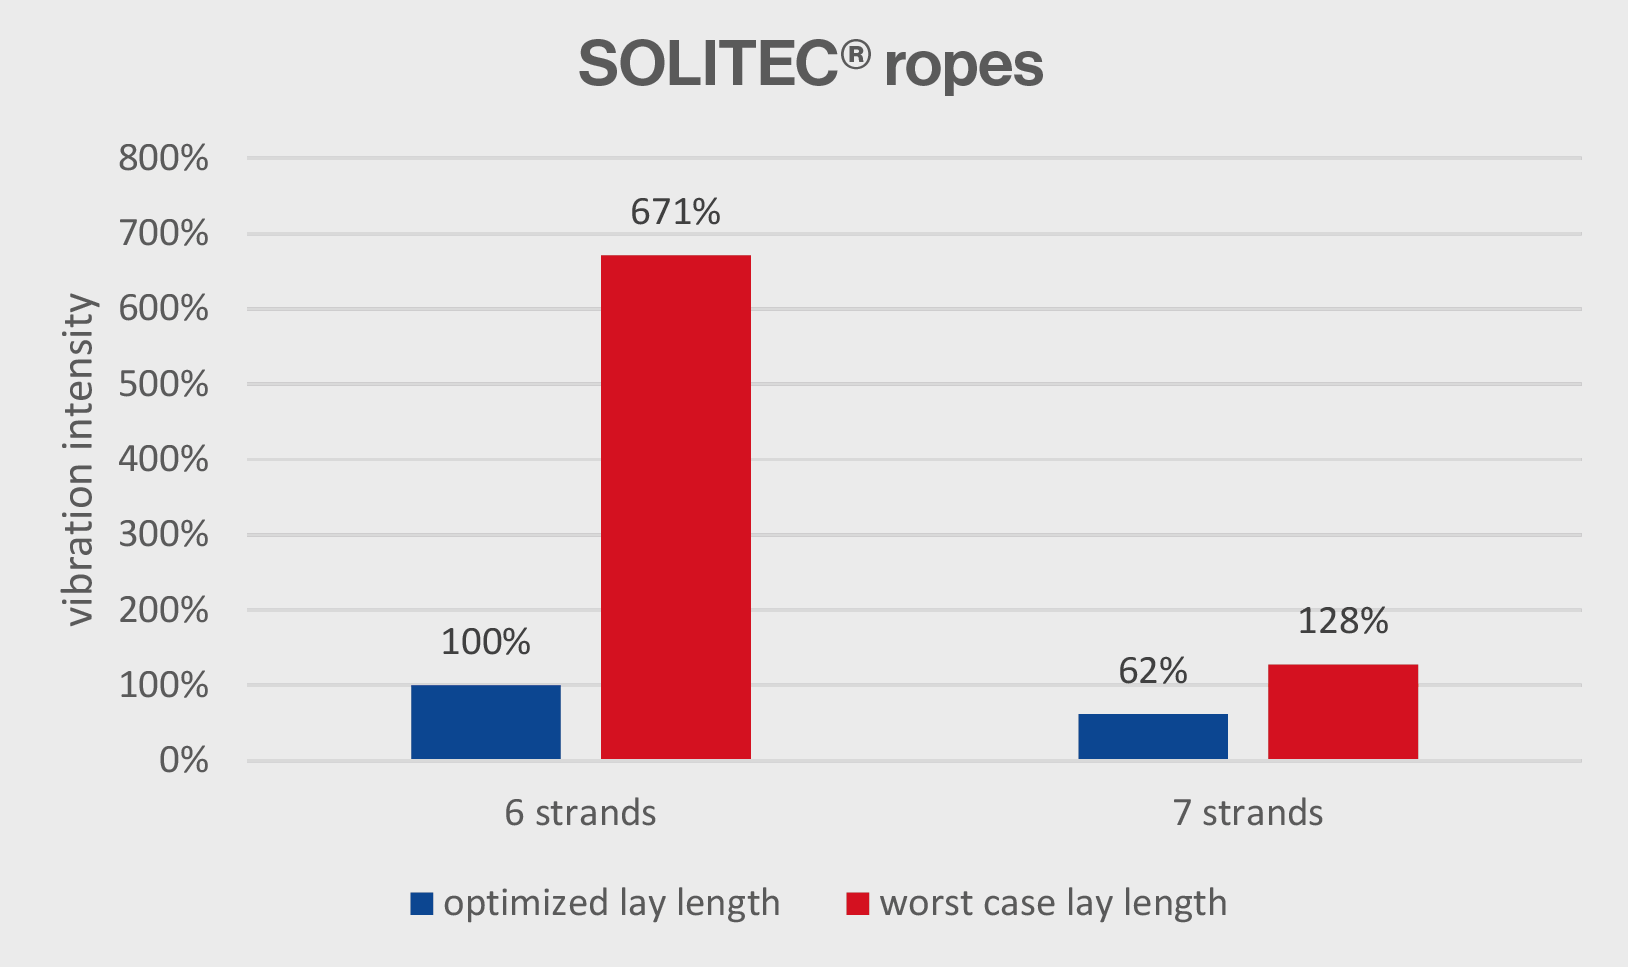 38% less vibration intensity of a 7-strand rope